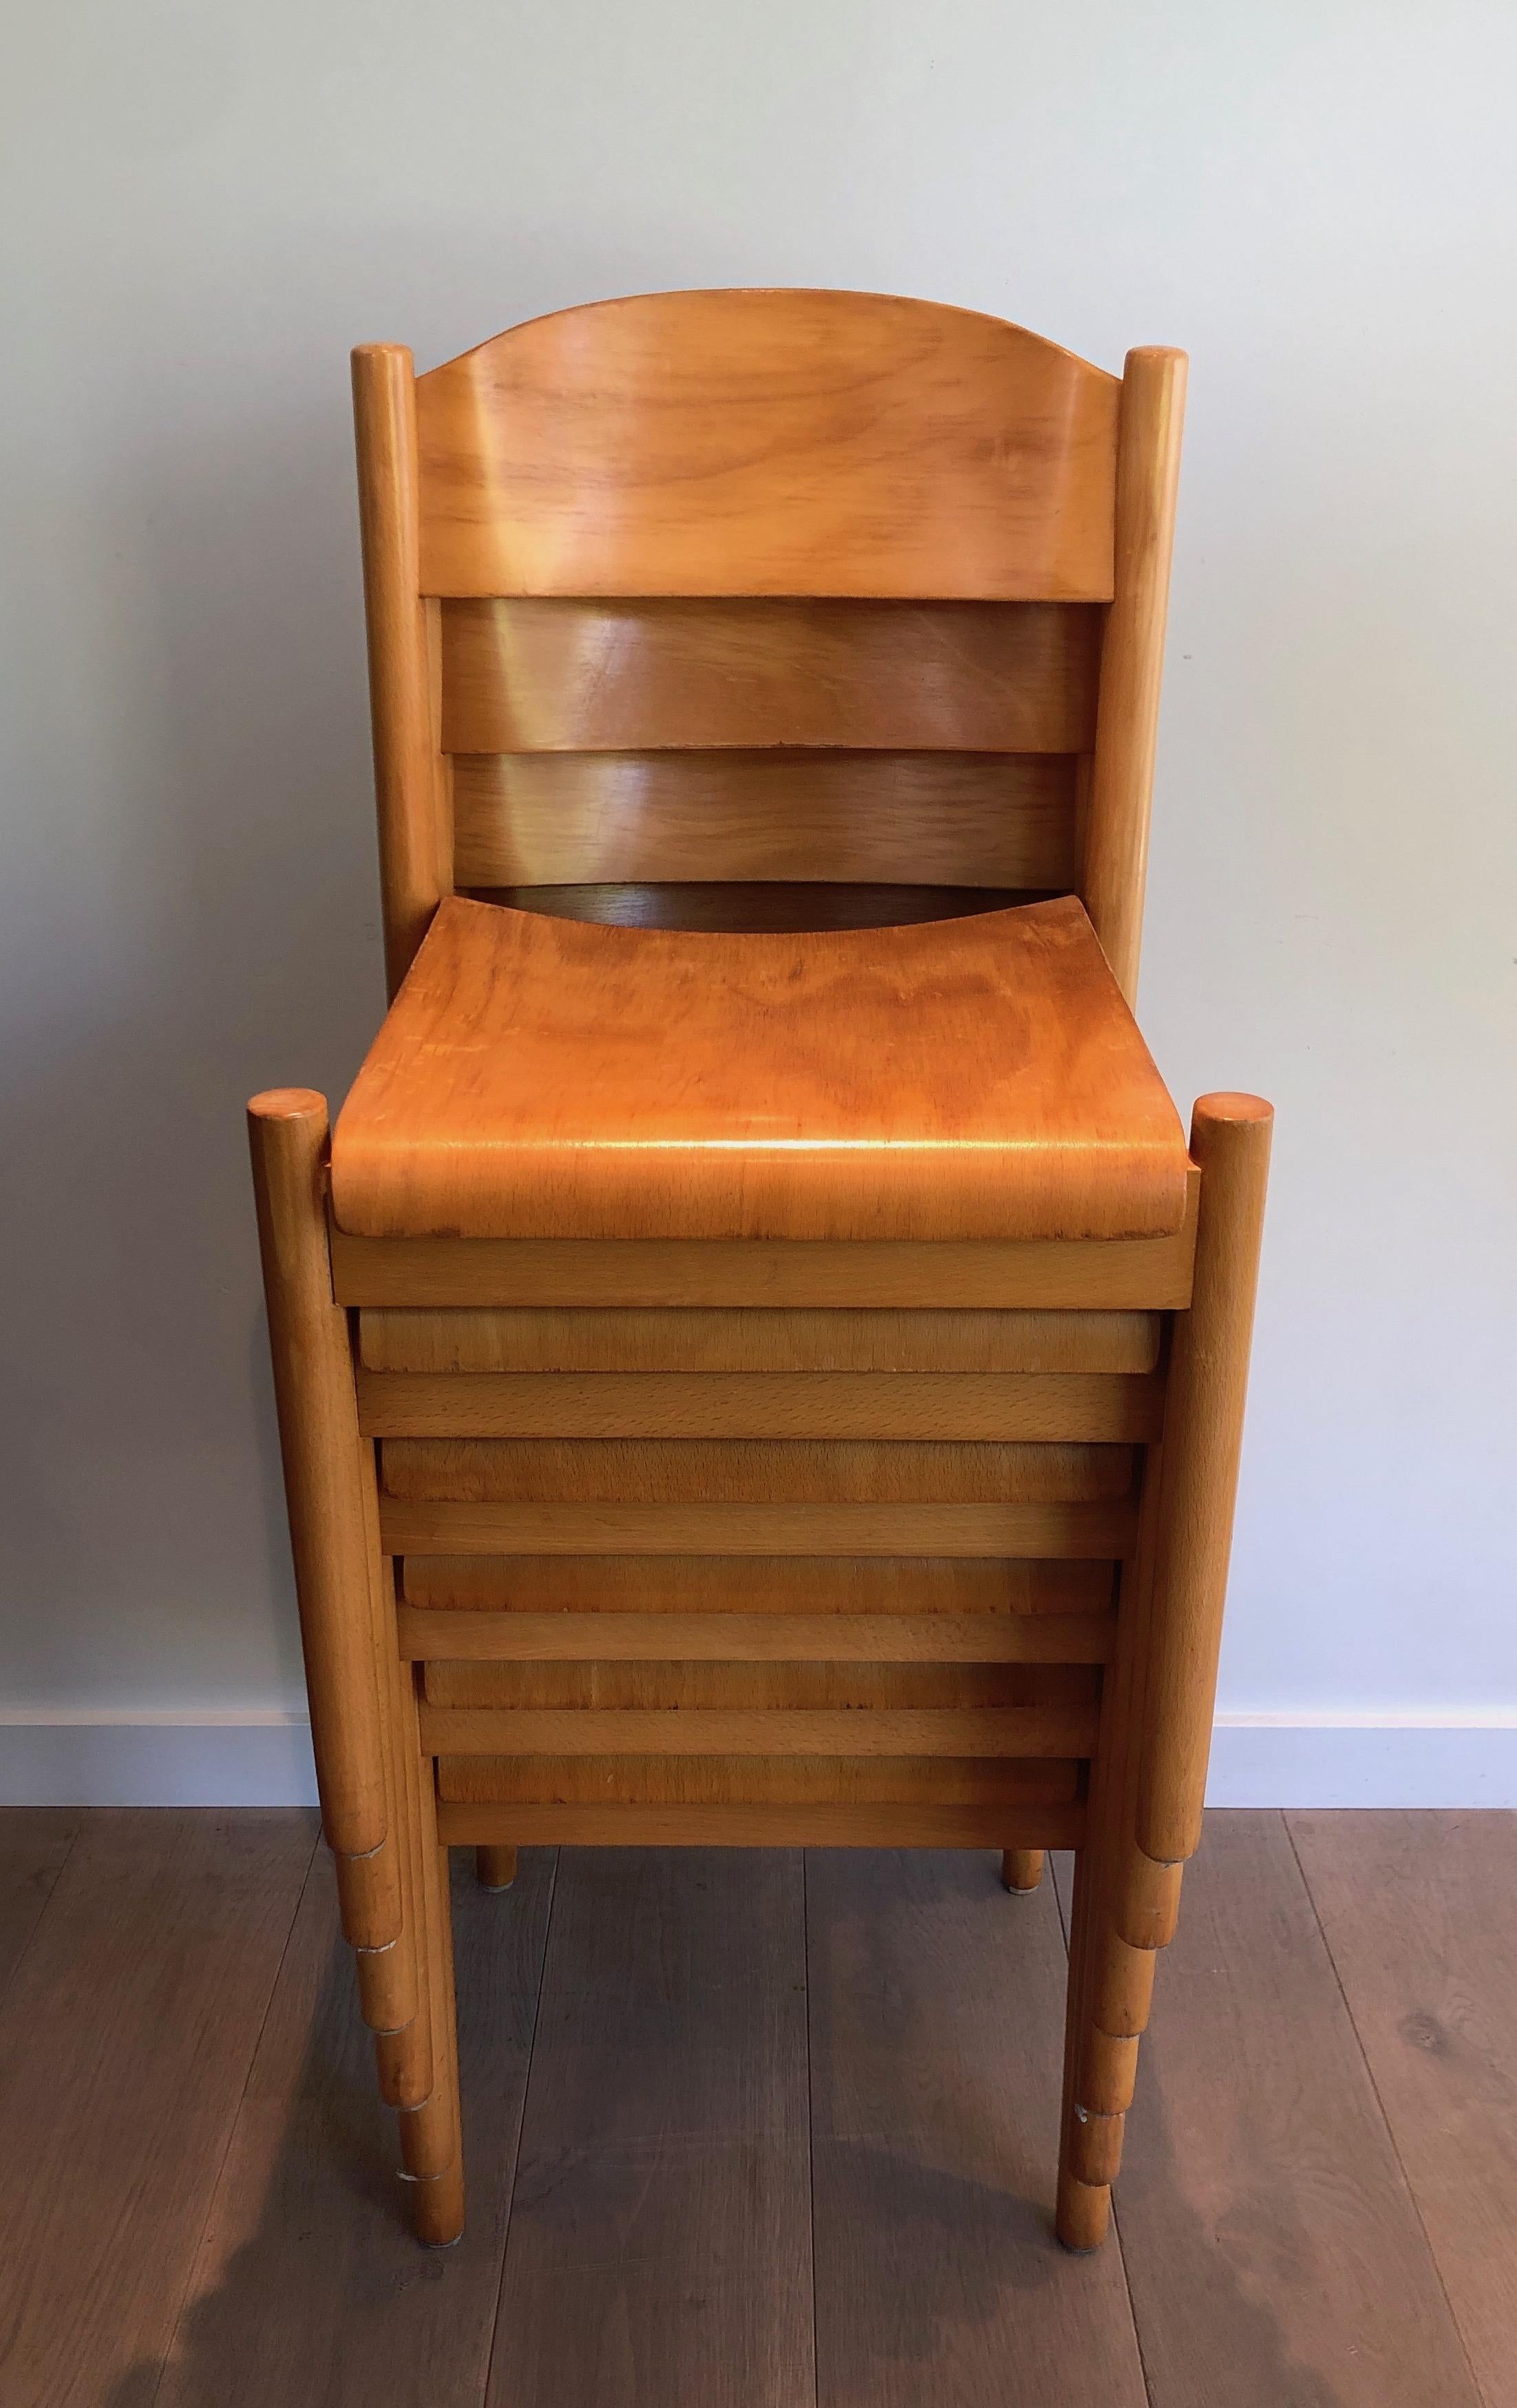 Set of 6 Stackable Pine Chairs, German Work by Karl Klipper, Circa 1970 For Sale 6